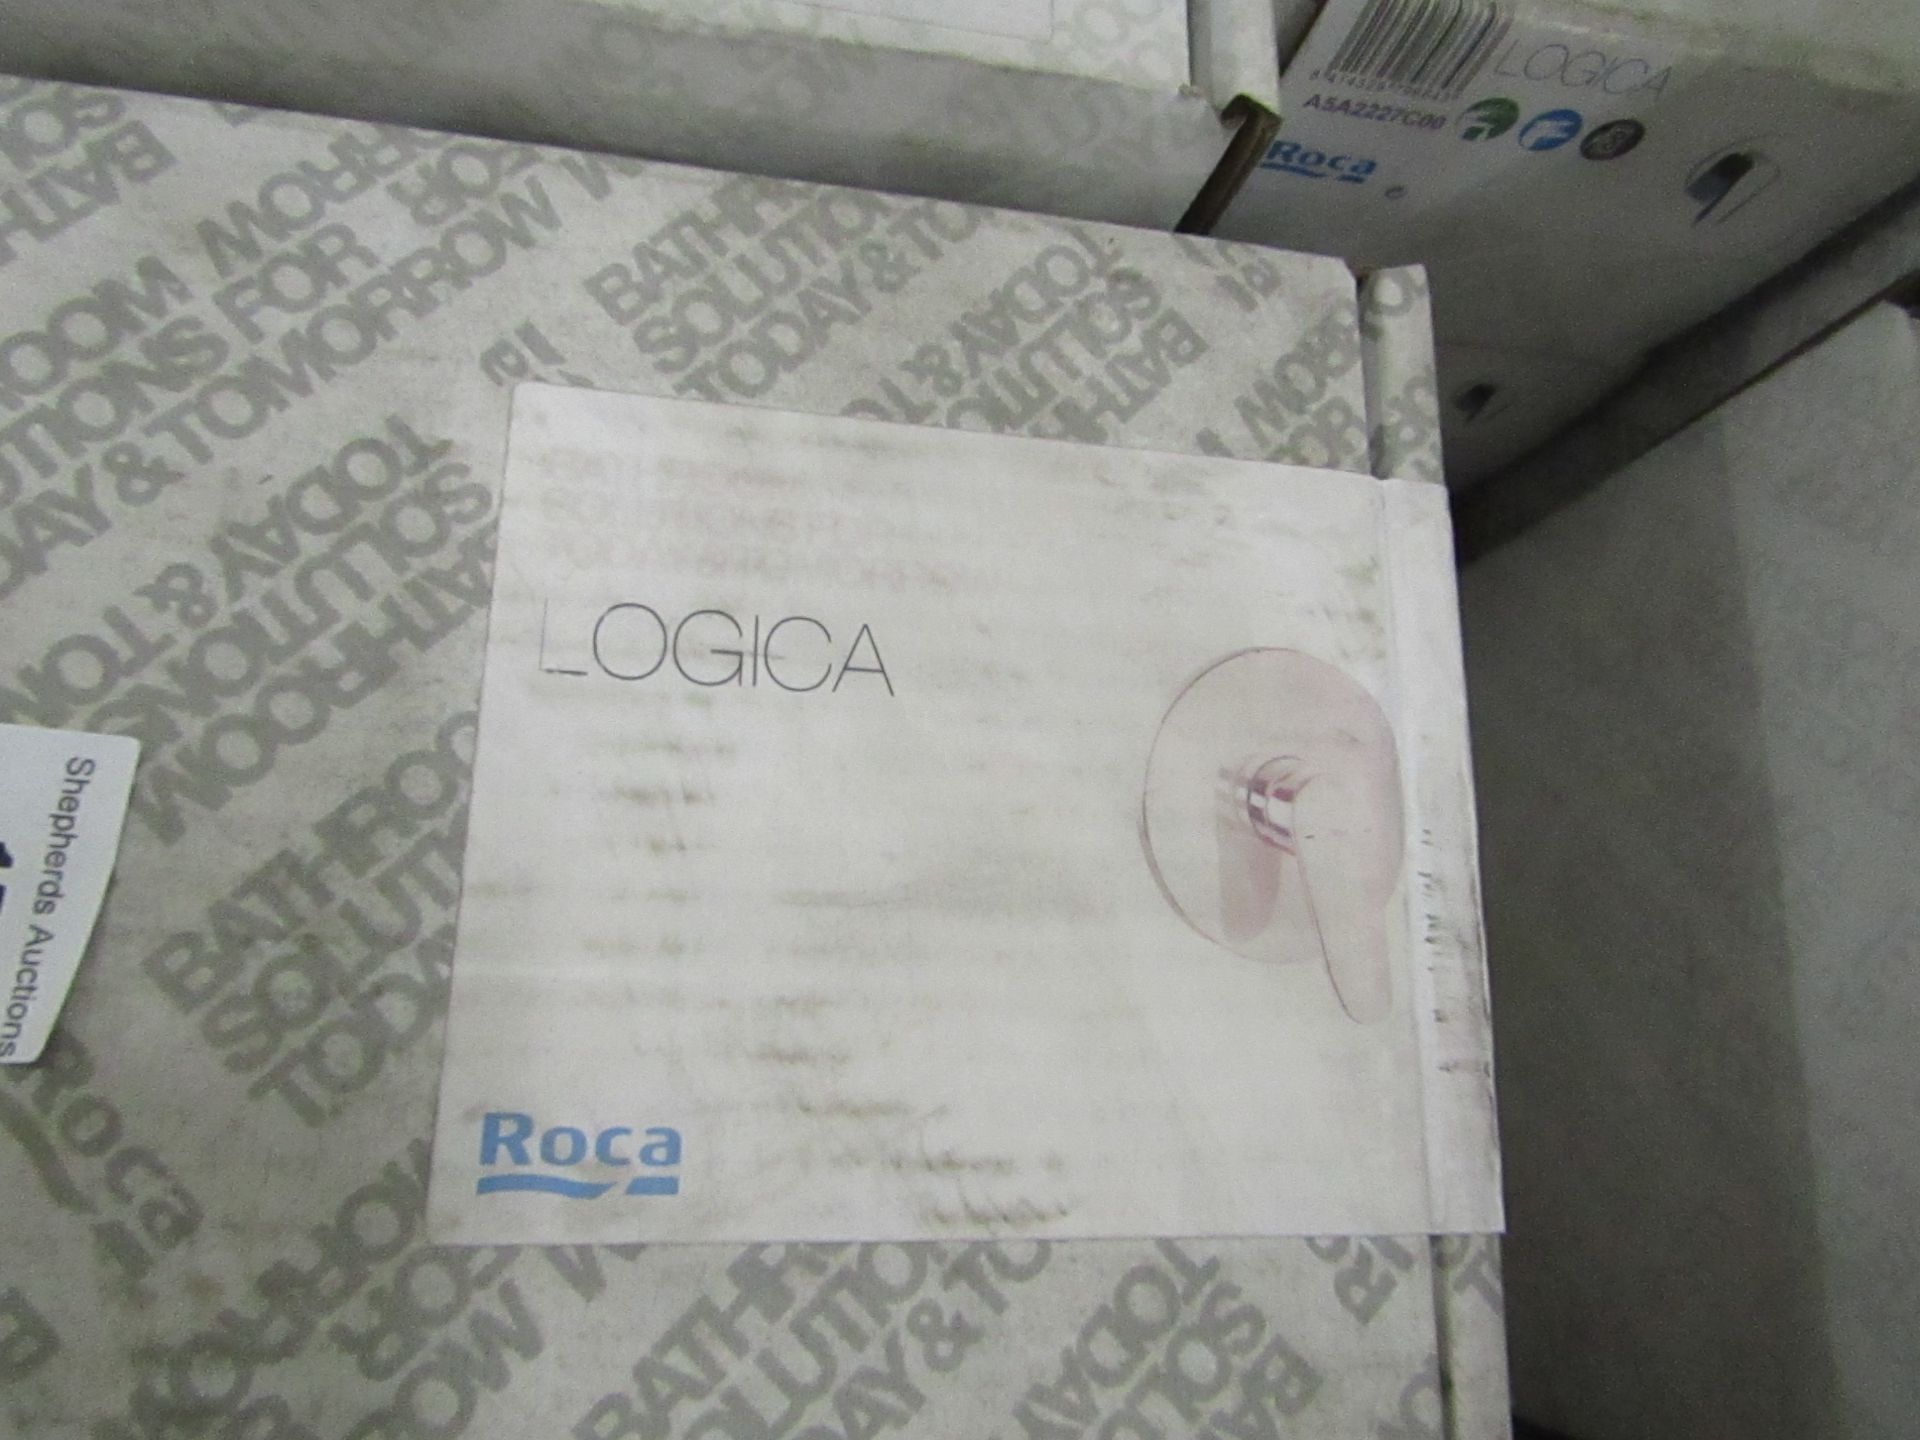 Roca Logica inset shower valve, boxed and still sealed, RRP £299 - Image 2 of 2